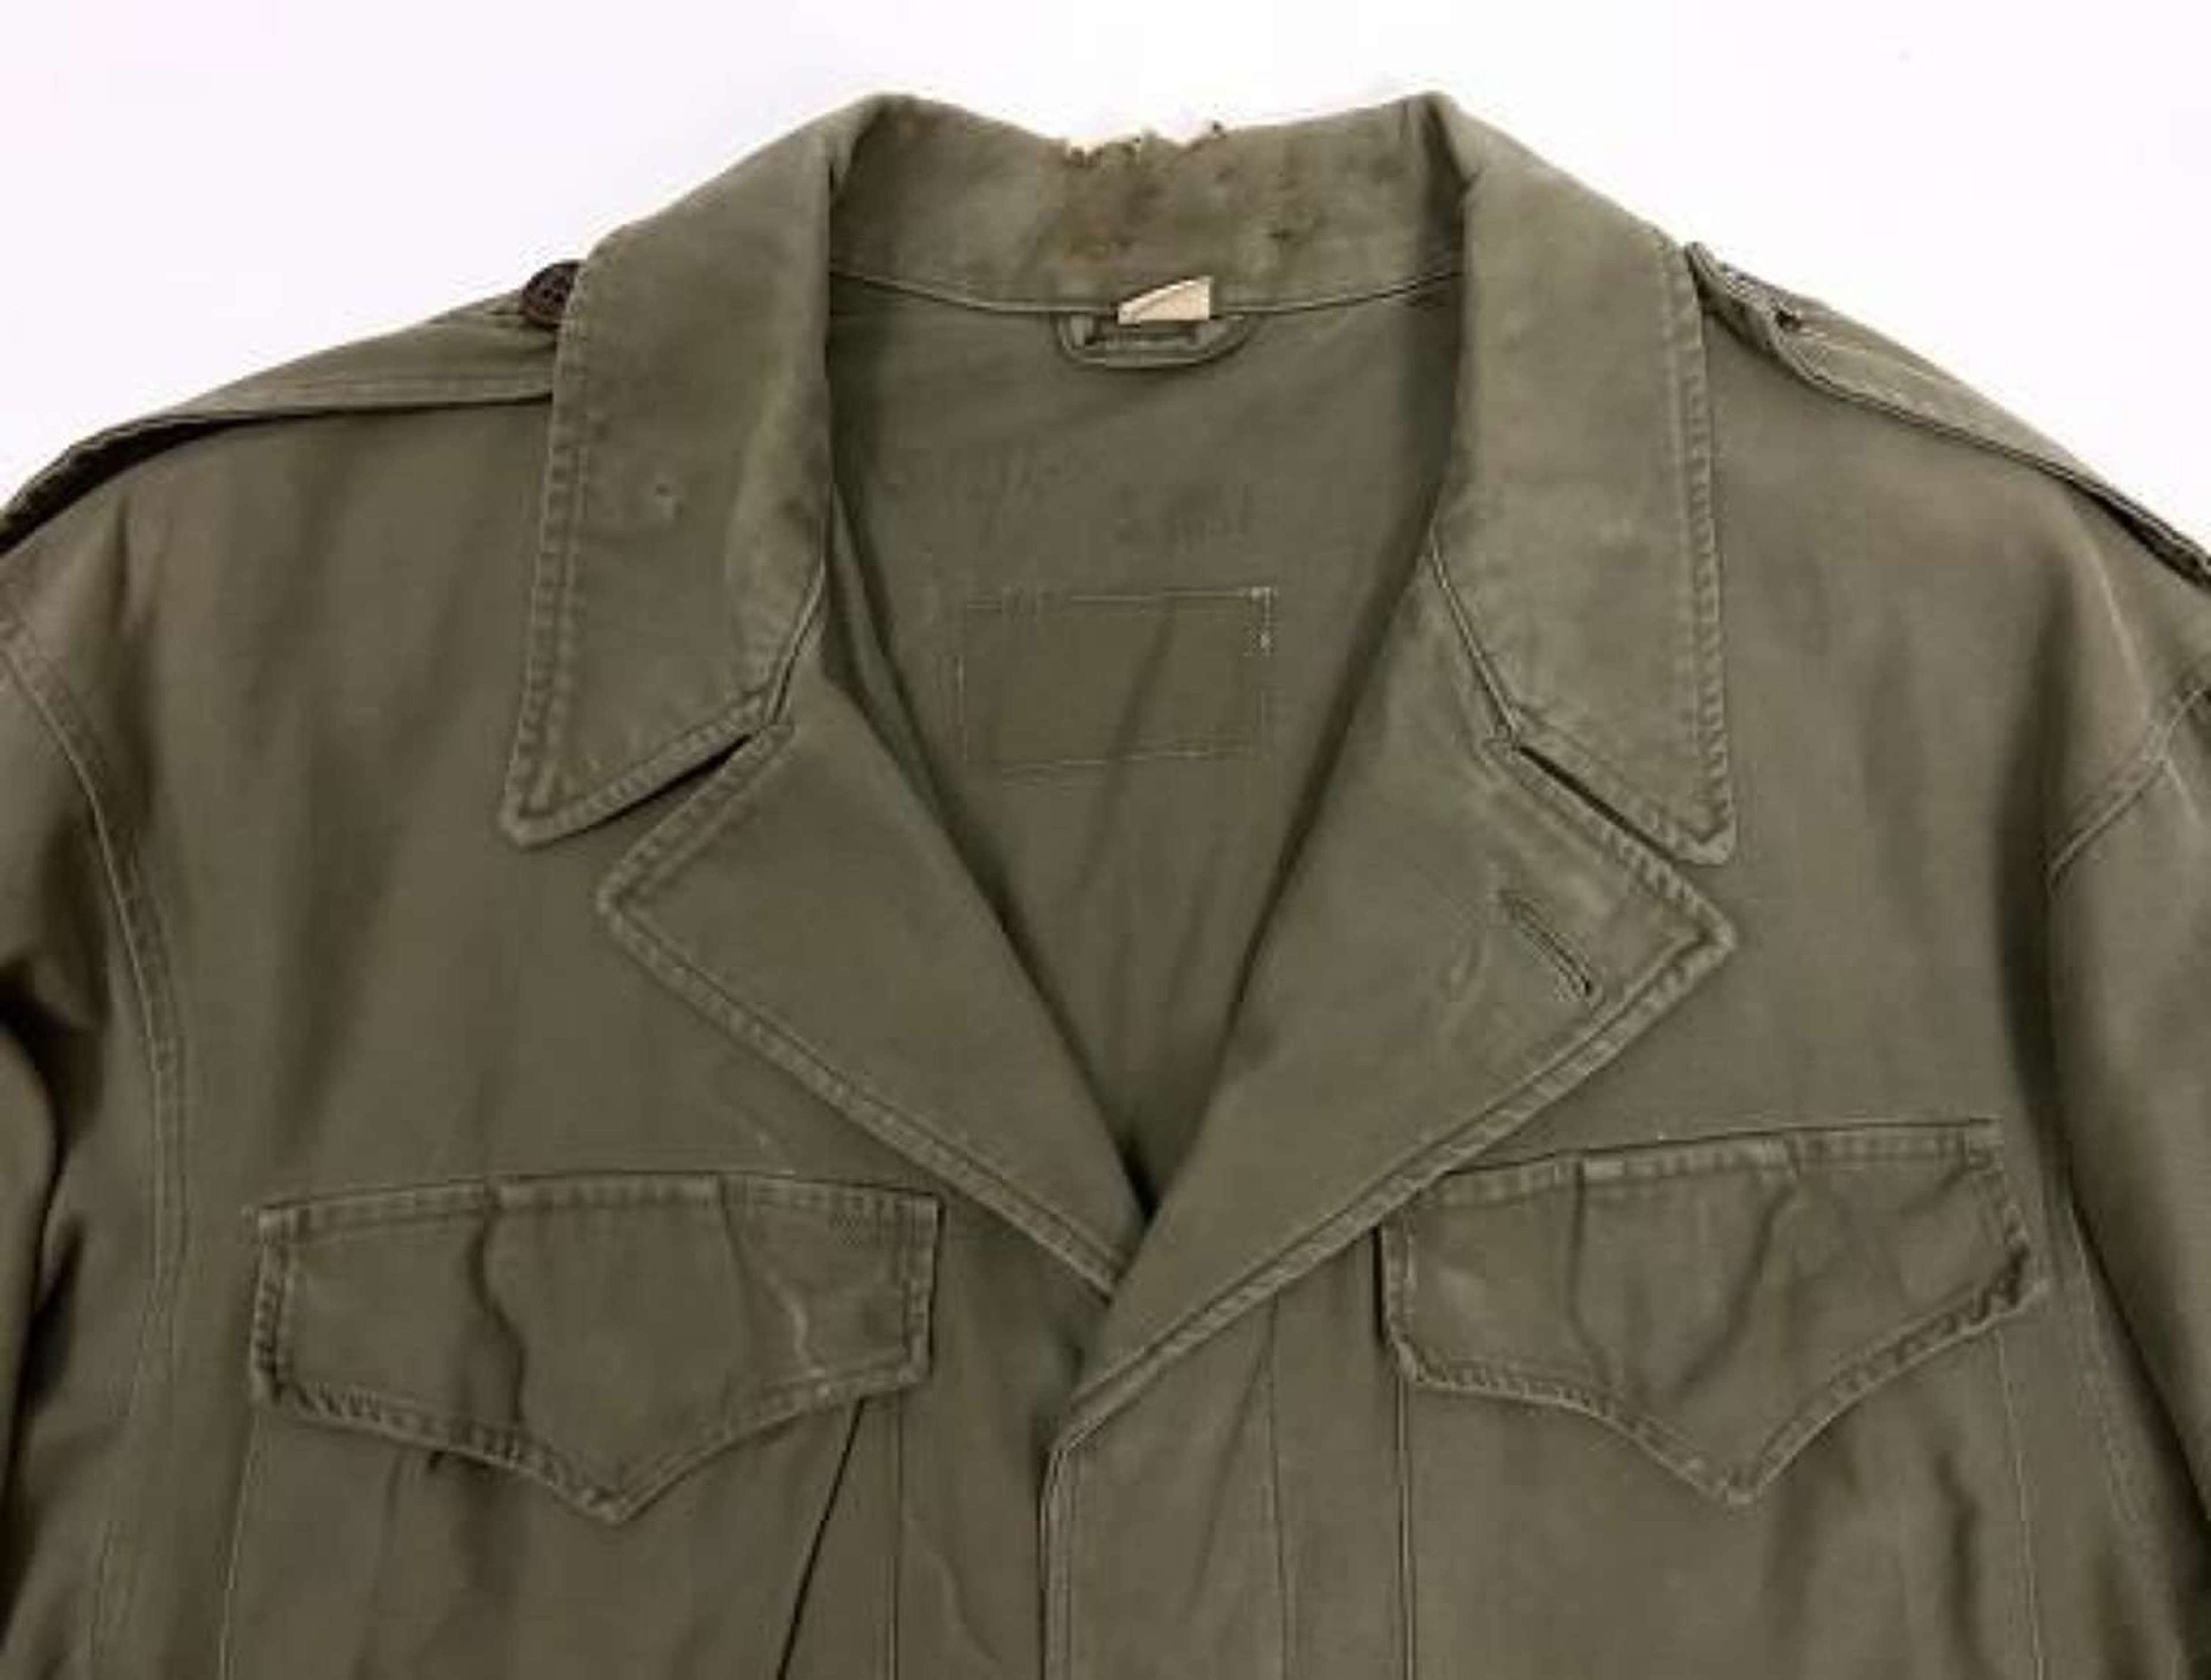 Original US Army M43 Combat Jacket - Size 40R in Jackets  coats